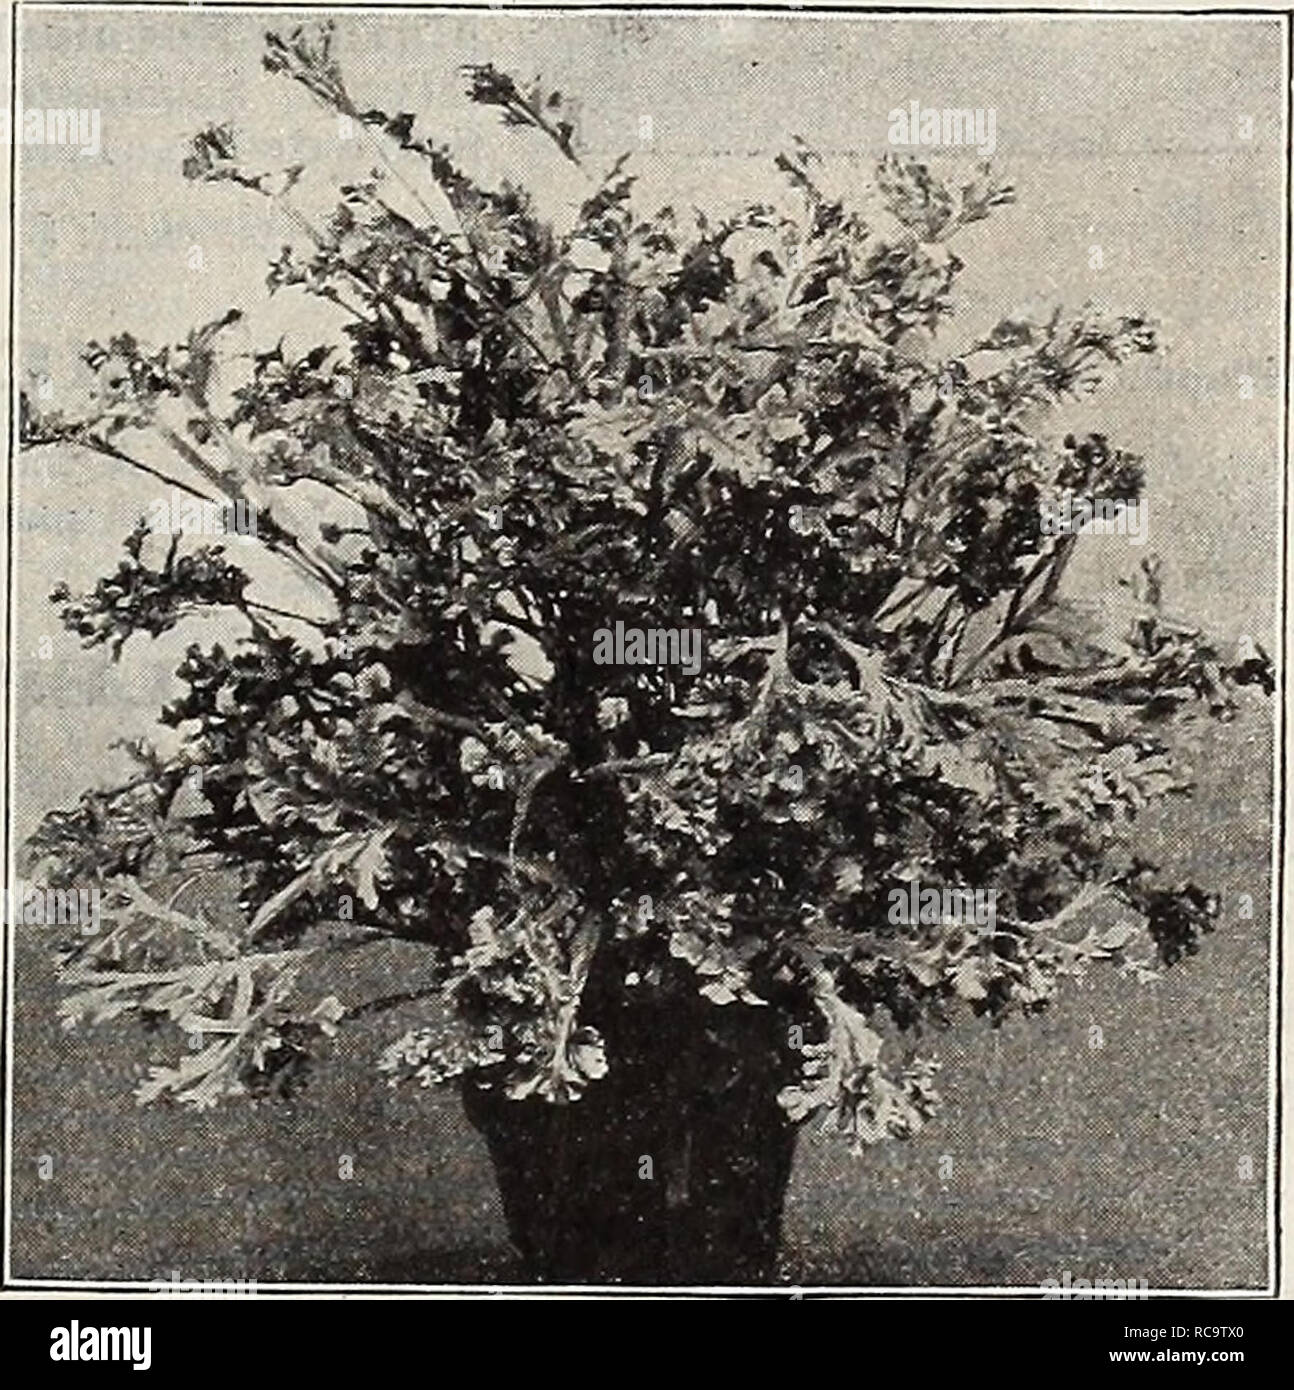 . Dreer's 1910 autumn catalogue. Bulbs (Plants) Catalogs; Flowers Seeds Catalogs; Gardening Equipment and supplies Catalogs; Nurseries (Horticulture) Catalogs; Fruit Seeds Catalogs; Vegetables Seeds Catalogs. Crested Fern (Pteris Wilsoni). Holly Fern CCyrtomium Falcatum). Nephrolepis Scholzeli (ThÂ± Plumed Scott, or Dwarf Boz ton Fern). In this new form, a sport from Scotti, we have ali the desirable features of ft-: parent, with plumy fronds similf.: to the Ostrich Plume Fern. ILf more compact and denser growtk, making an ideal decorative plaai for the house. Specimens in 6- inch pots, 75 cts Stock Photo